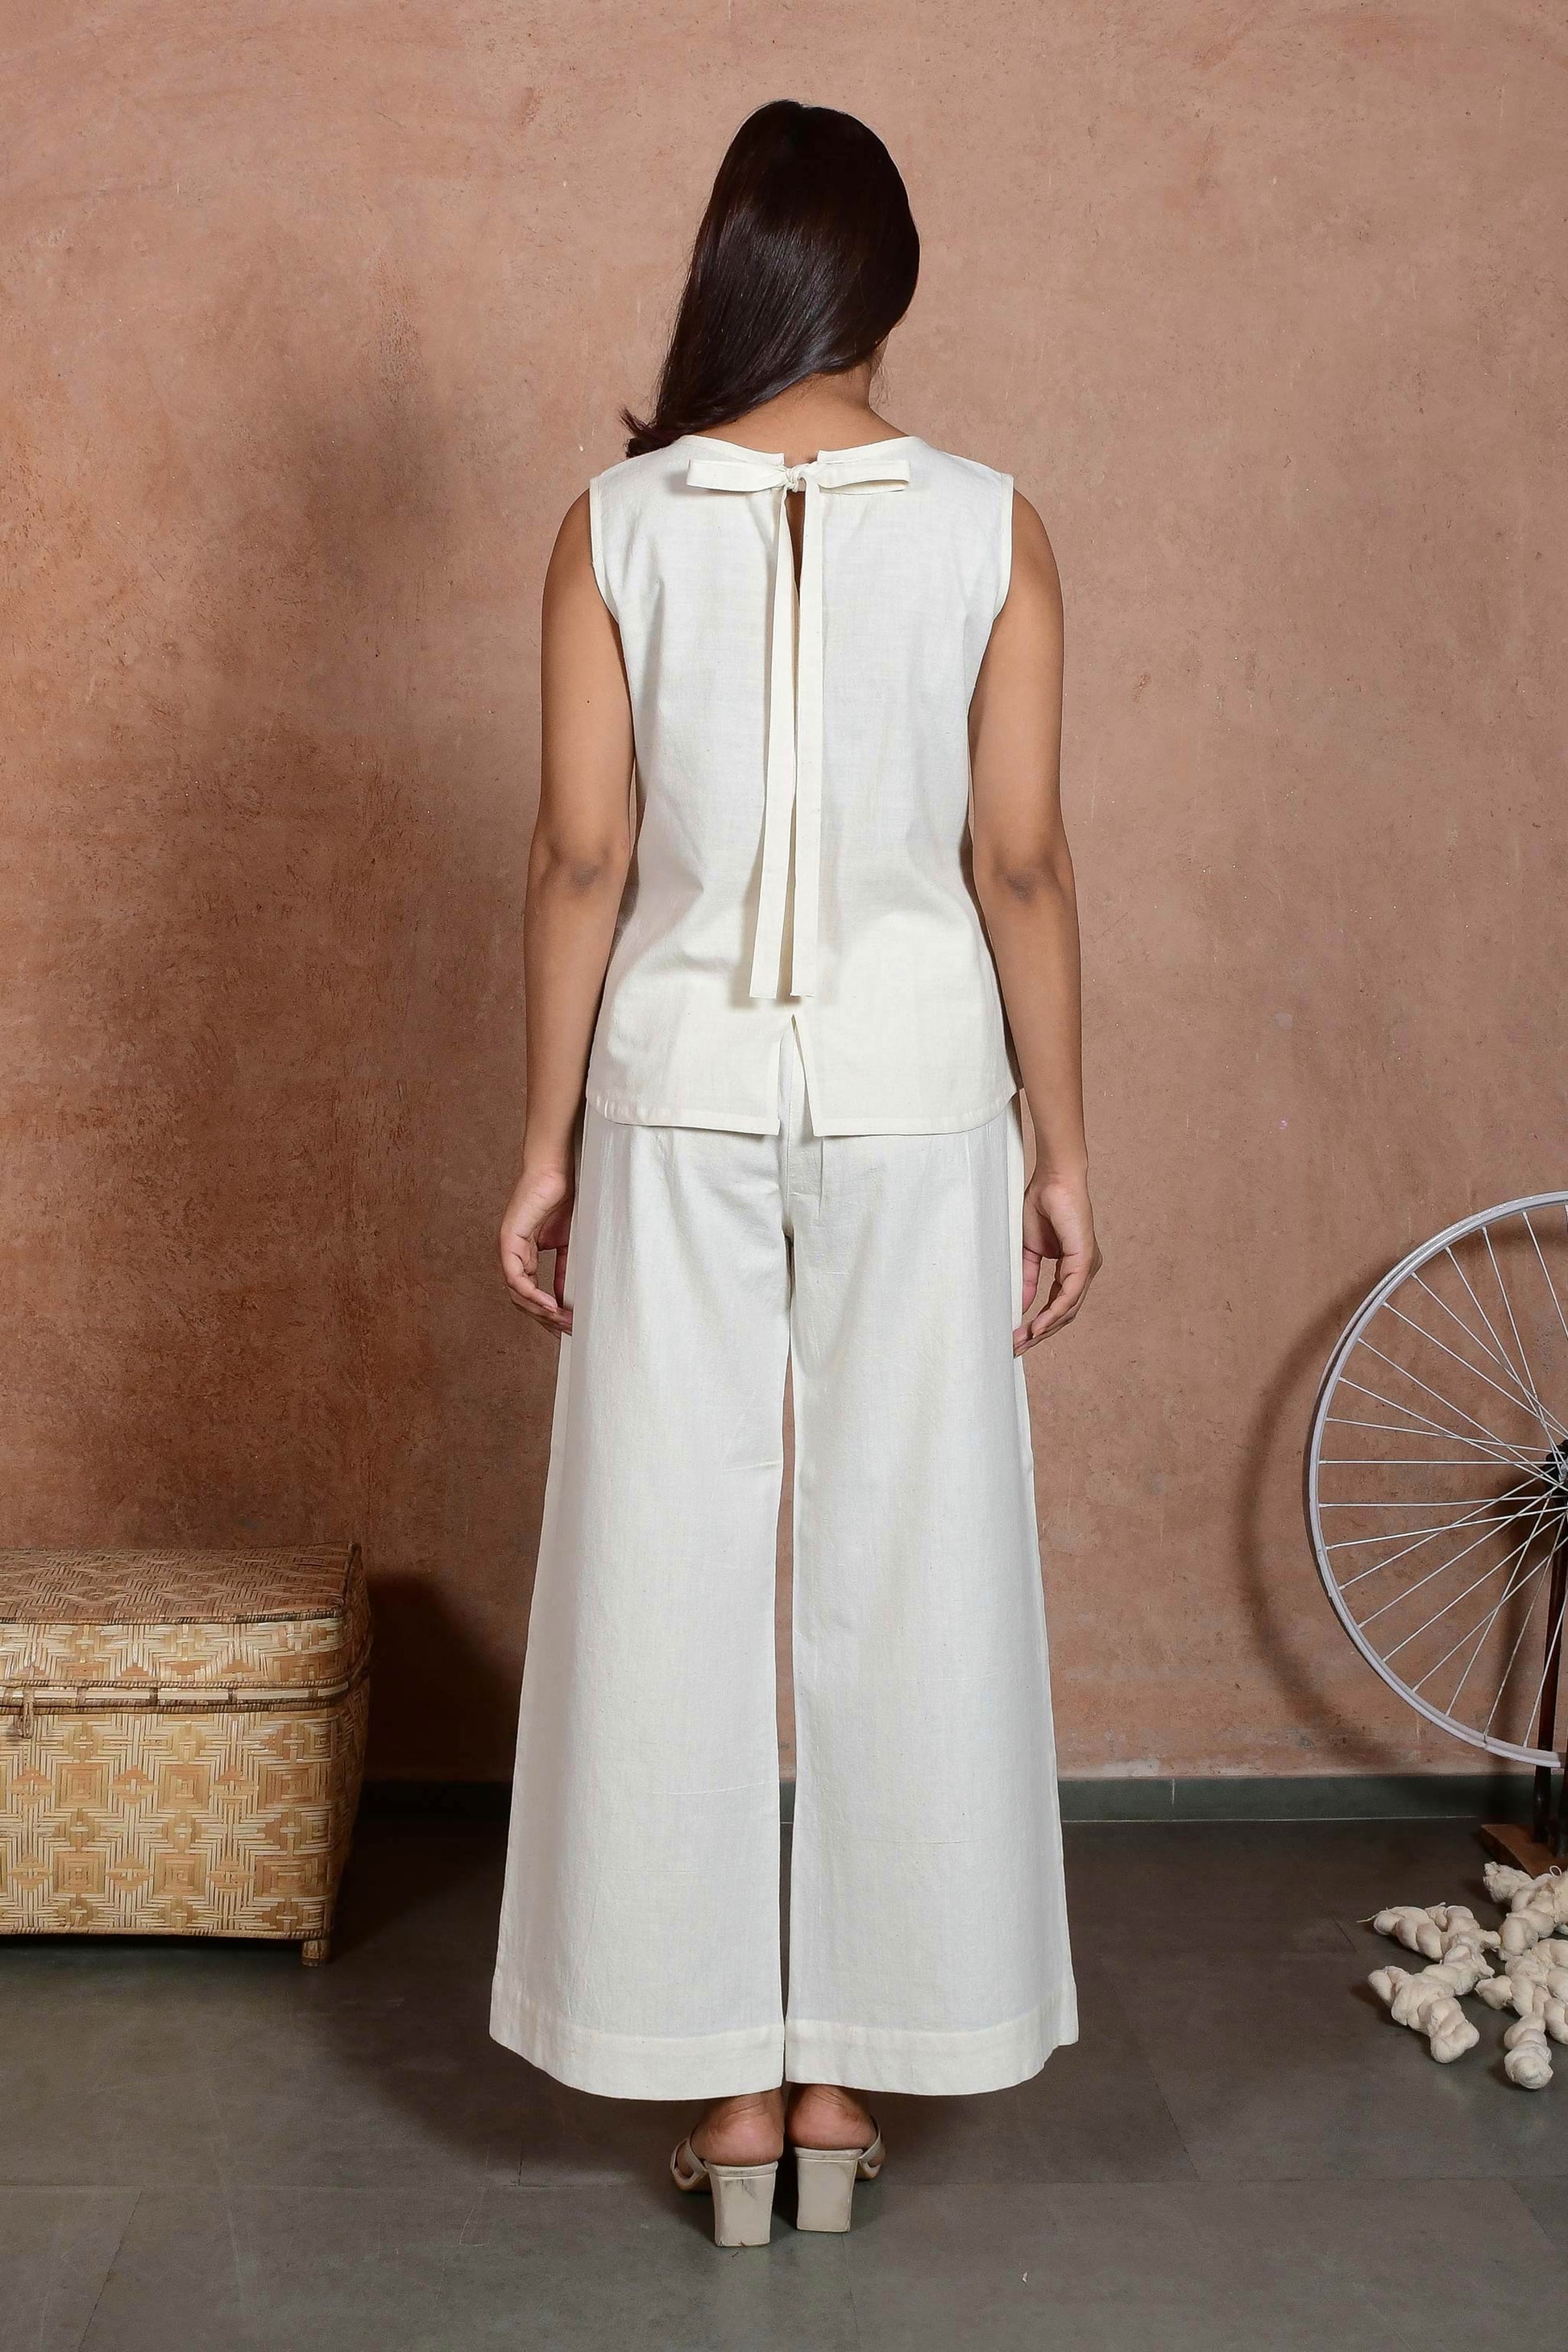 Back pose of young Indian model posing wearing off white sleeveless top with a bow tied at the neck and straight pants.